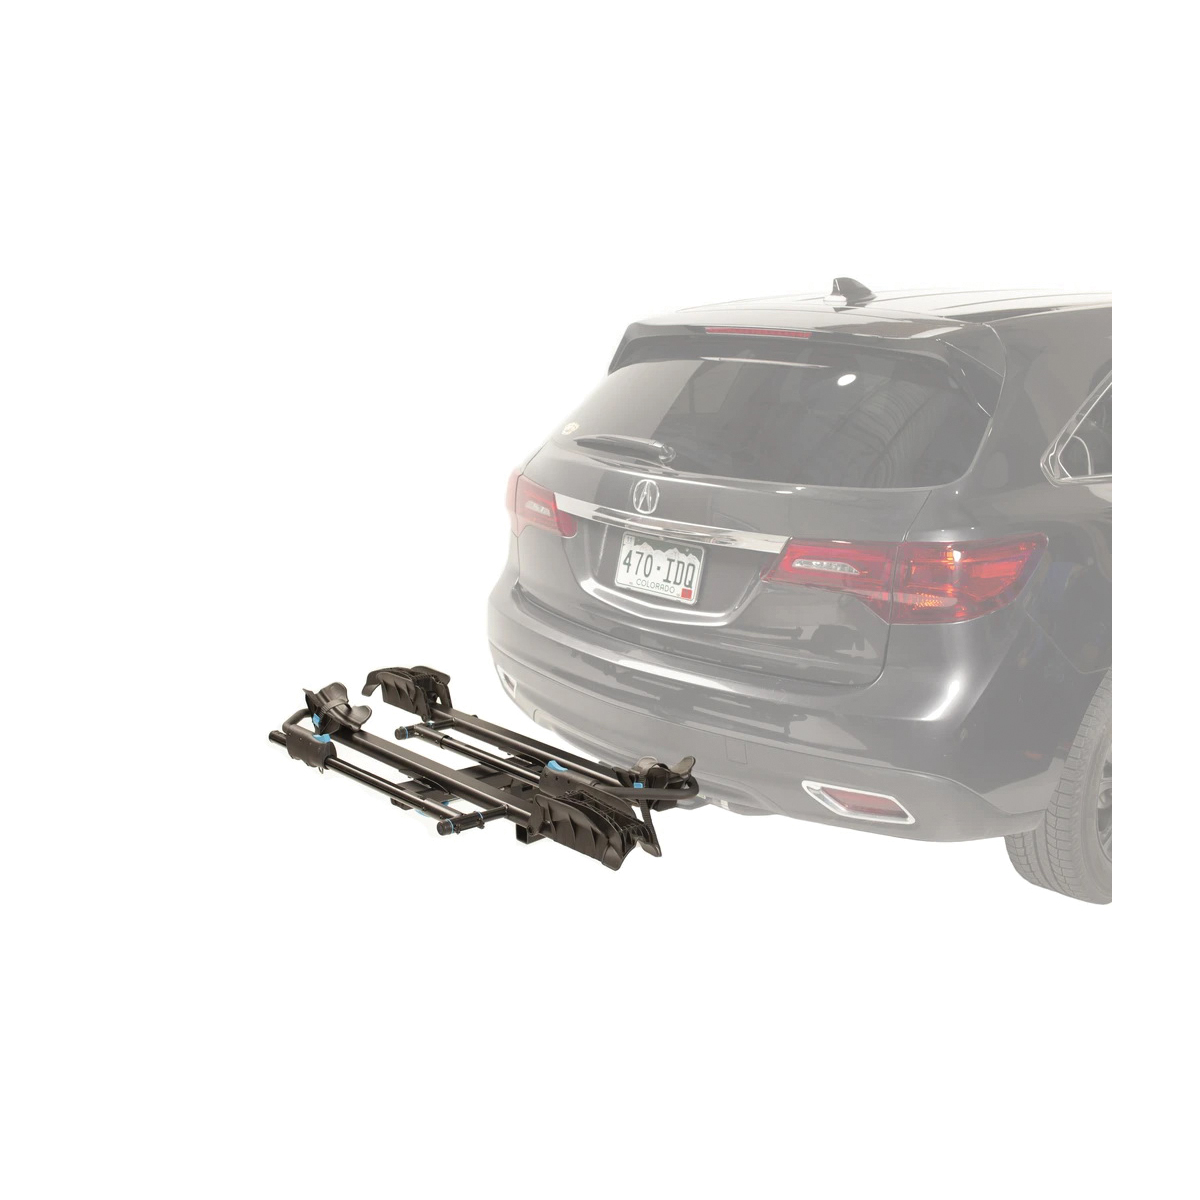 RockyMounts 11415 Platform Hitch Rack, For: 34 to 49 in Bicycles Wheelbases - 4